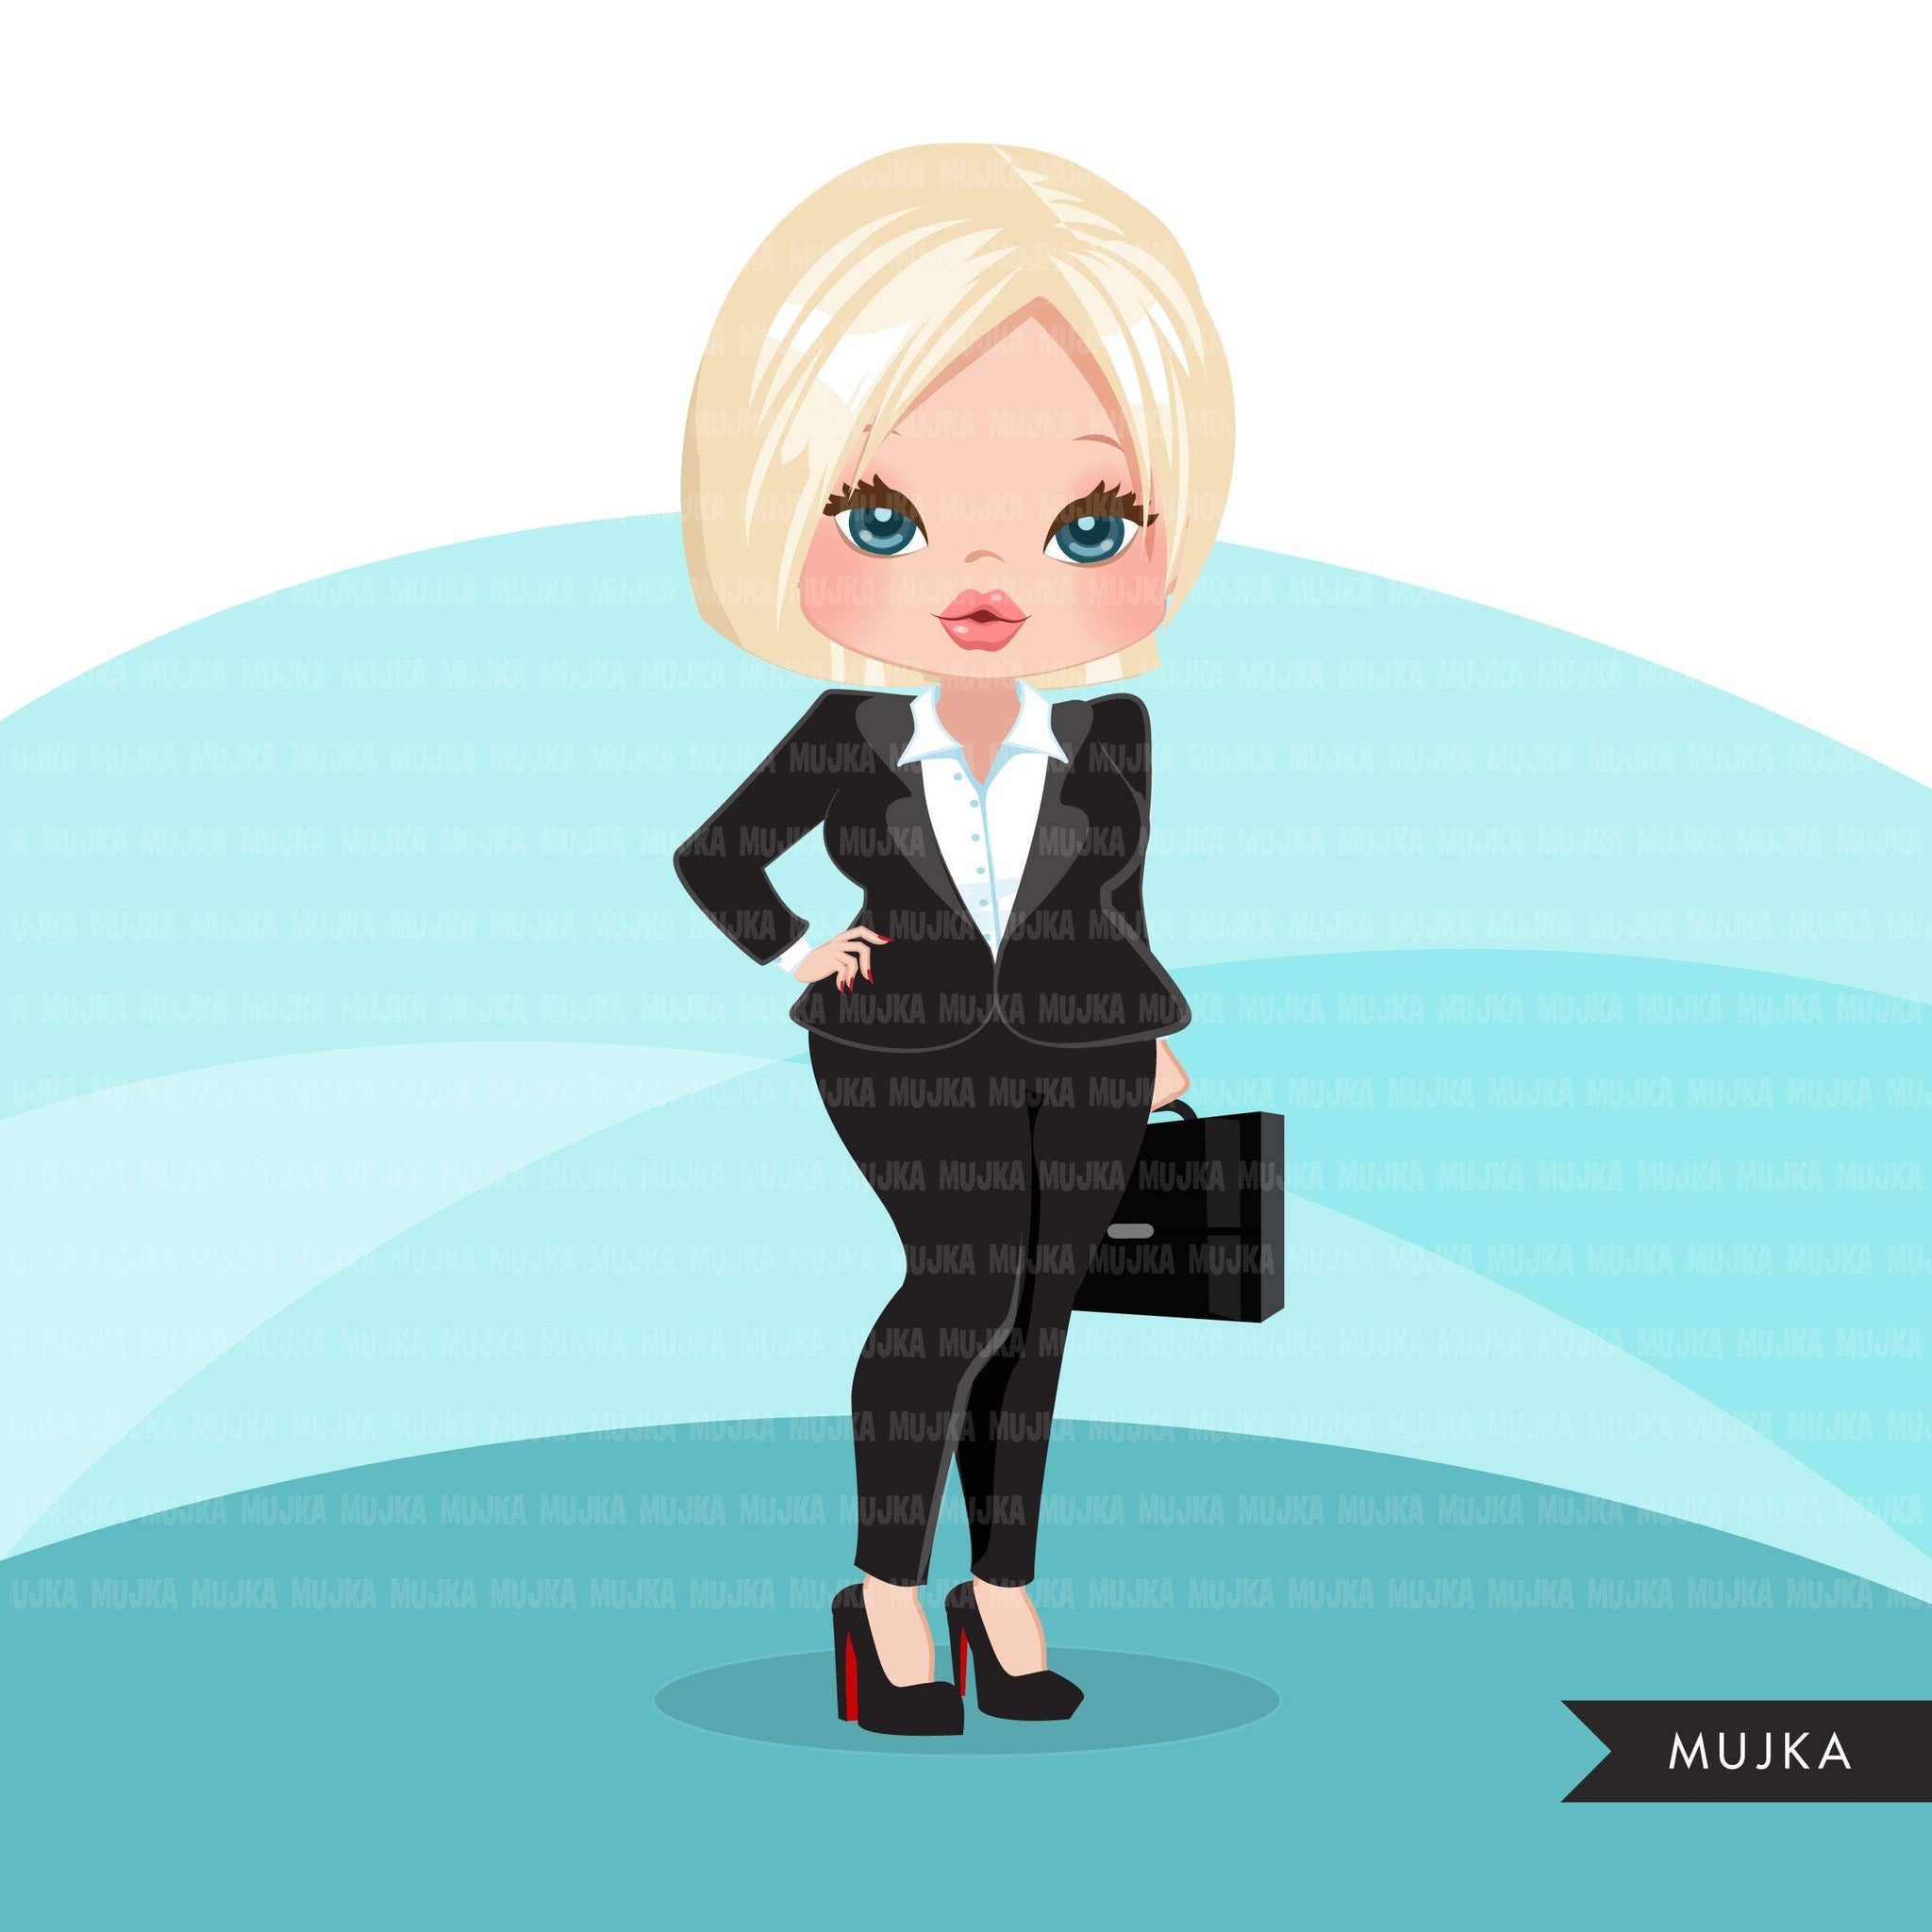 Blonde woman clipart with business suit, briefcase and glasses, girl boss